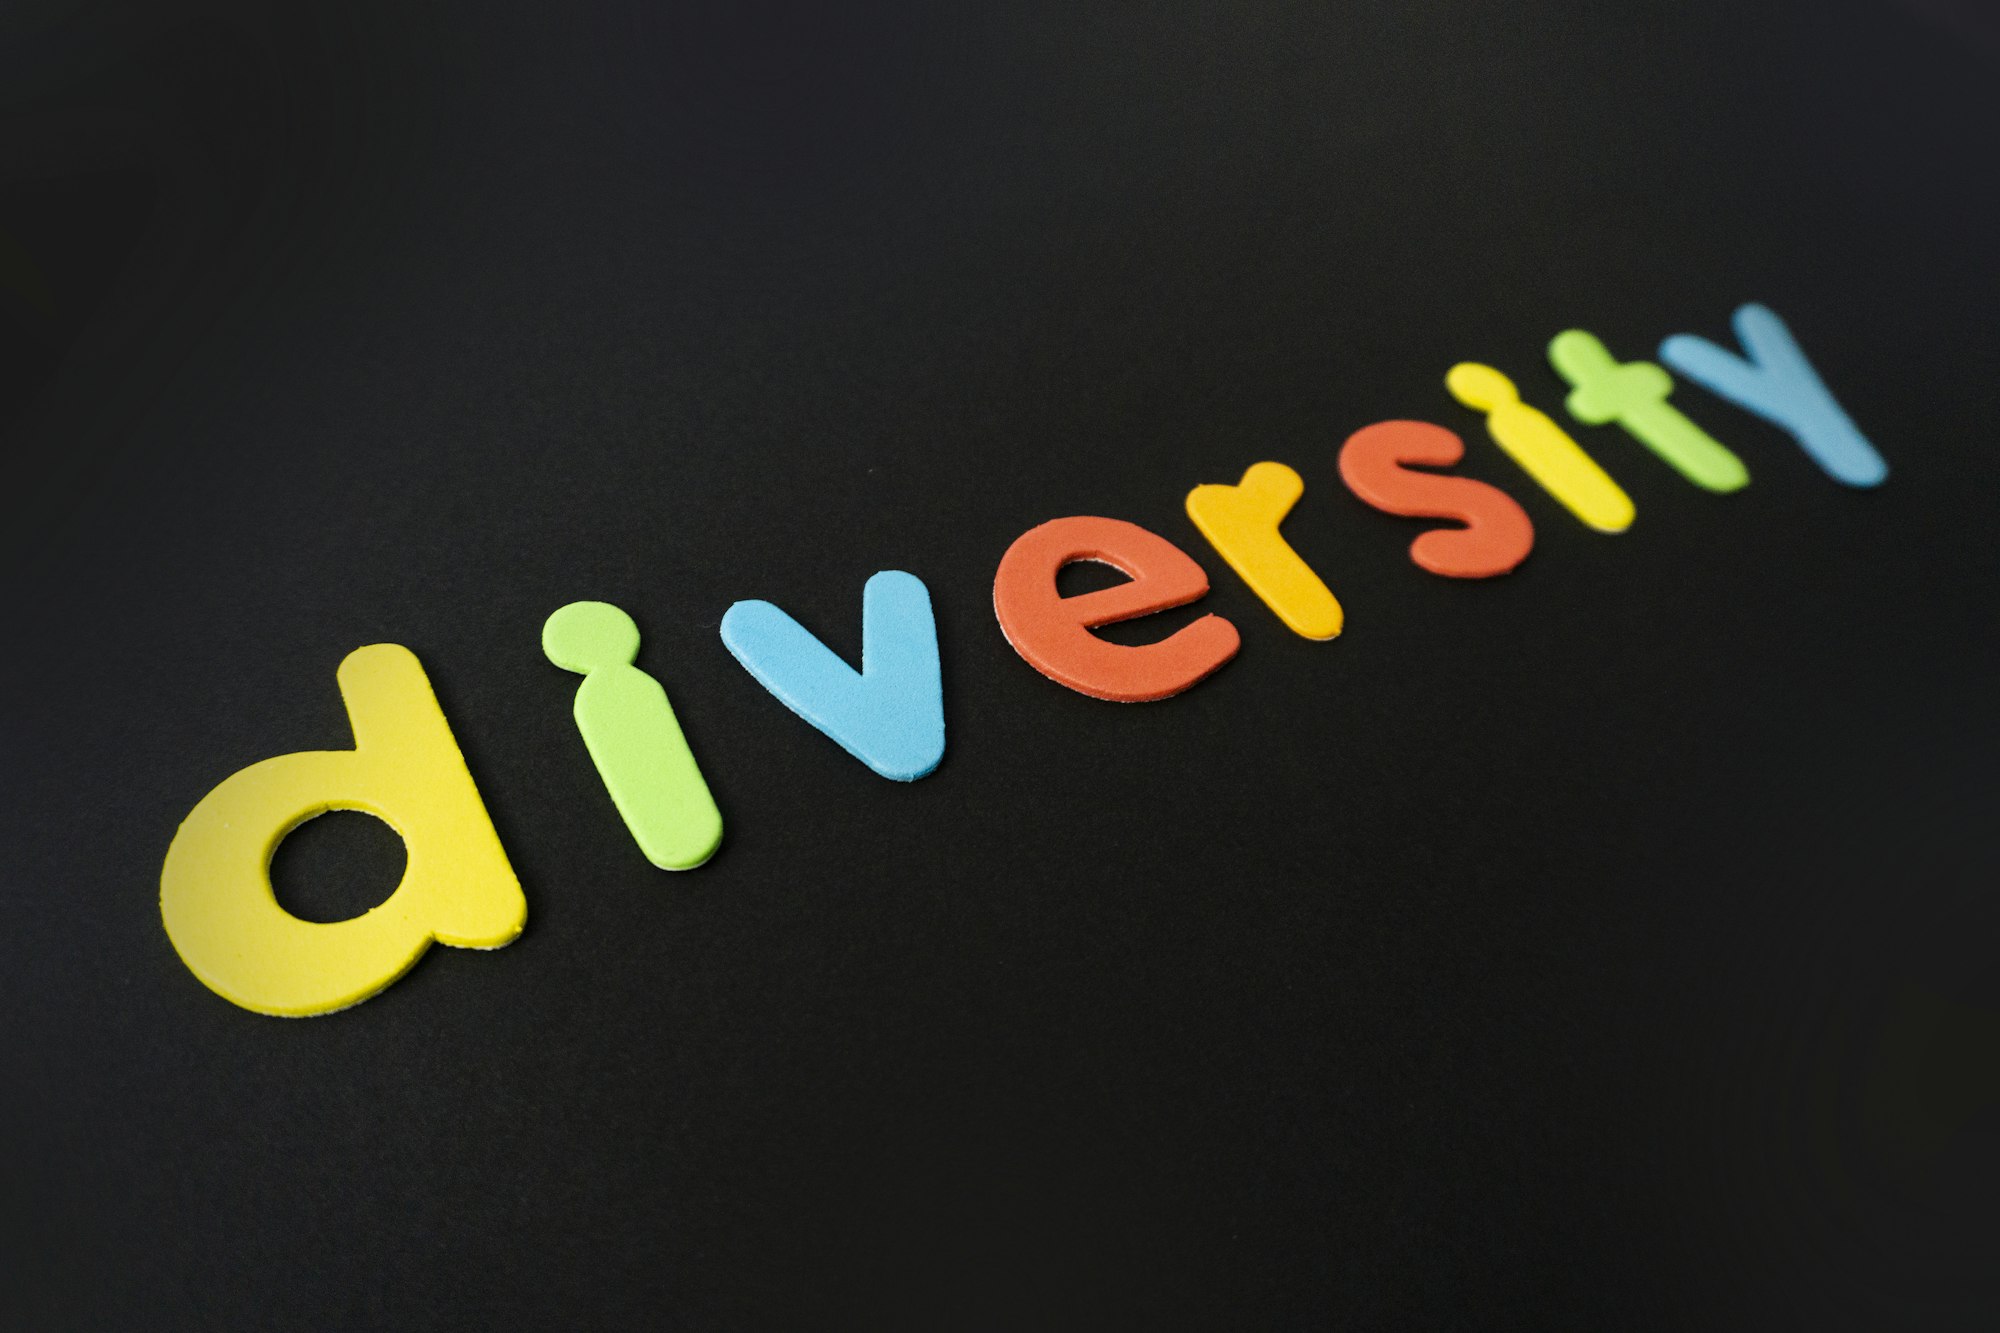 Diversity, equity, and inclusion matters.